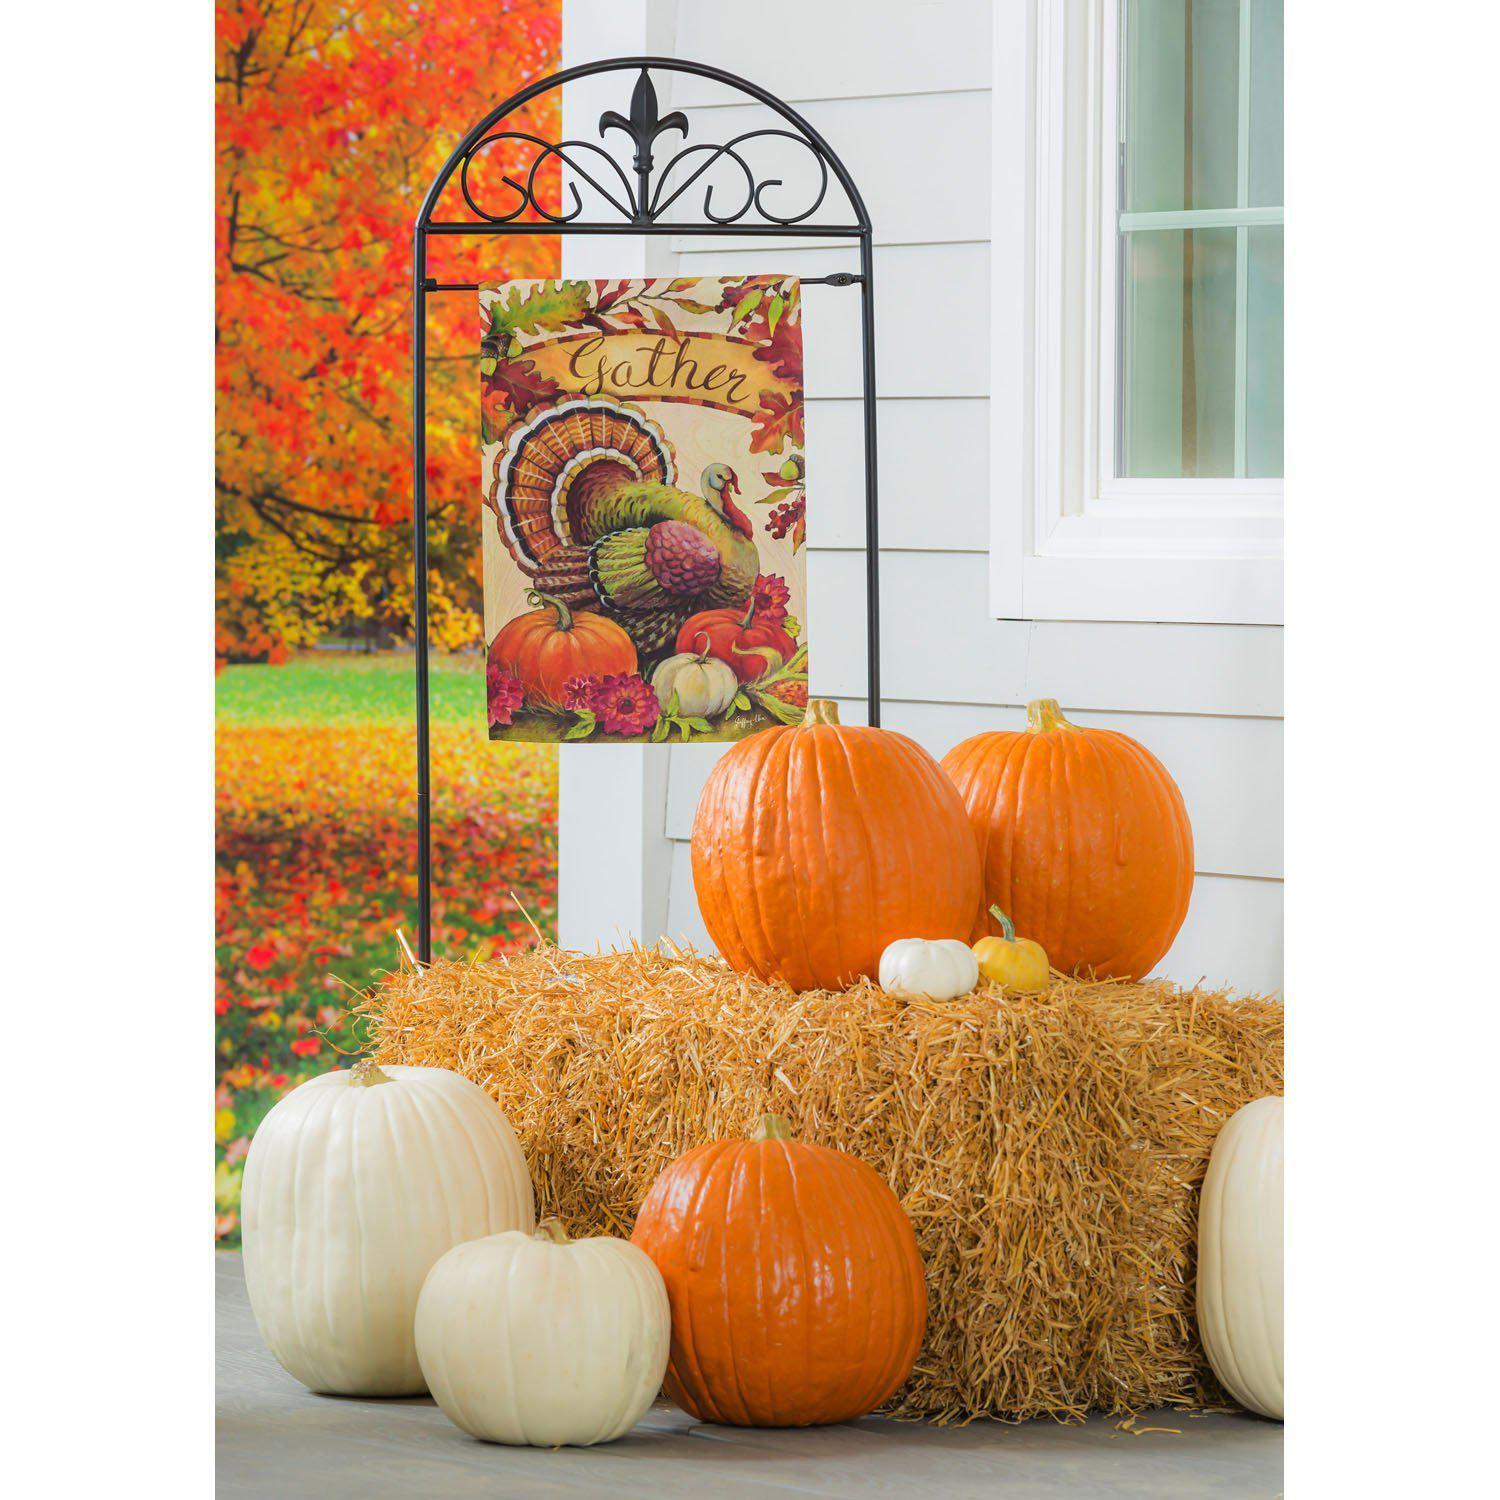 The Warm Gathering Turkey garden flag features a turkey resting among pumpkins and the word "Gather" surrounded by fall leaves. 